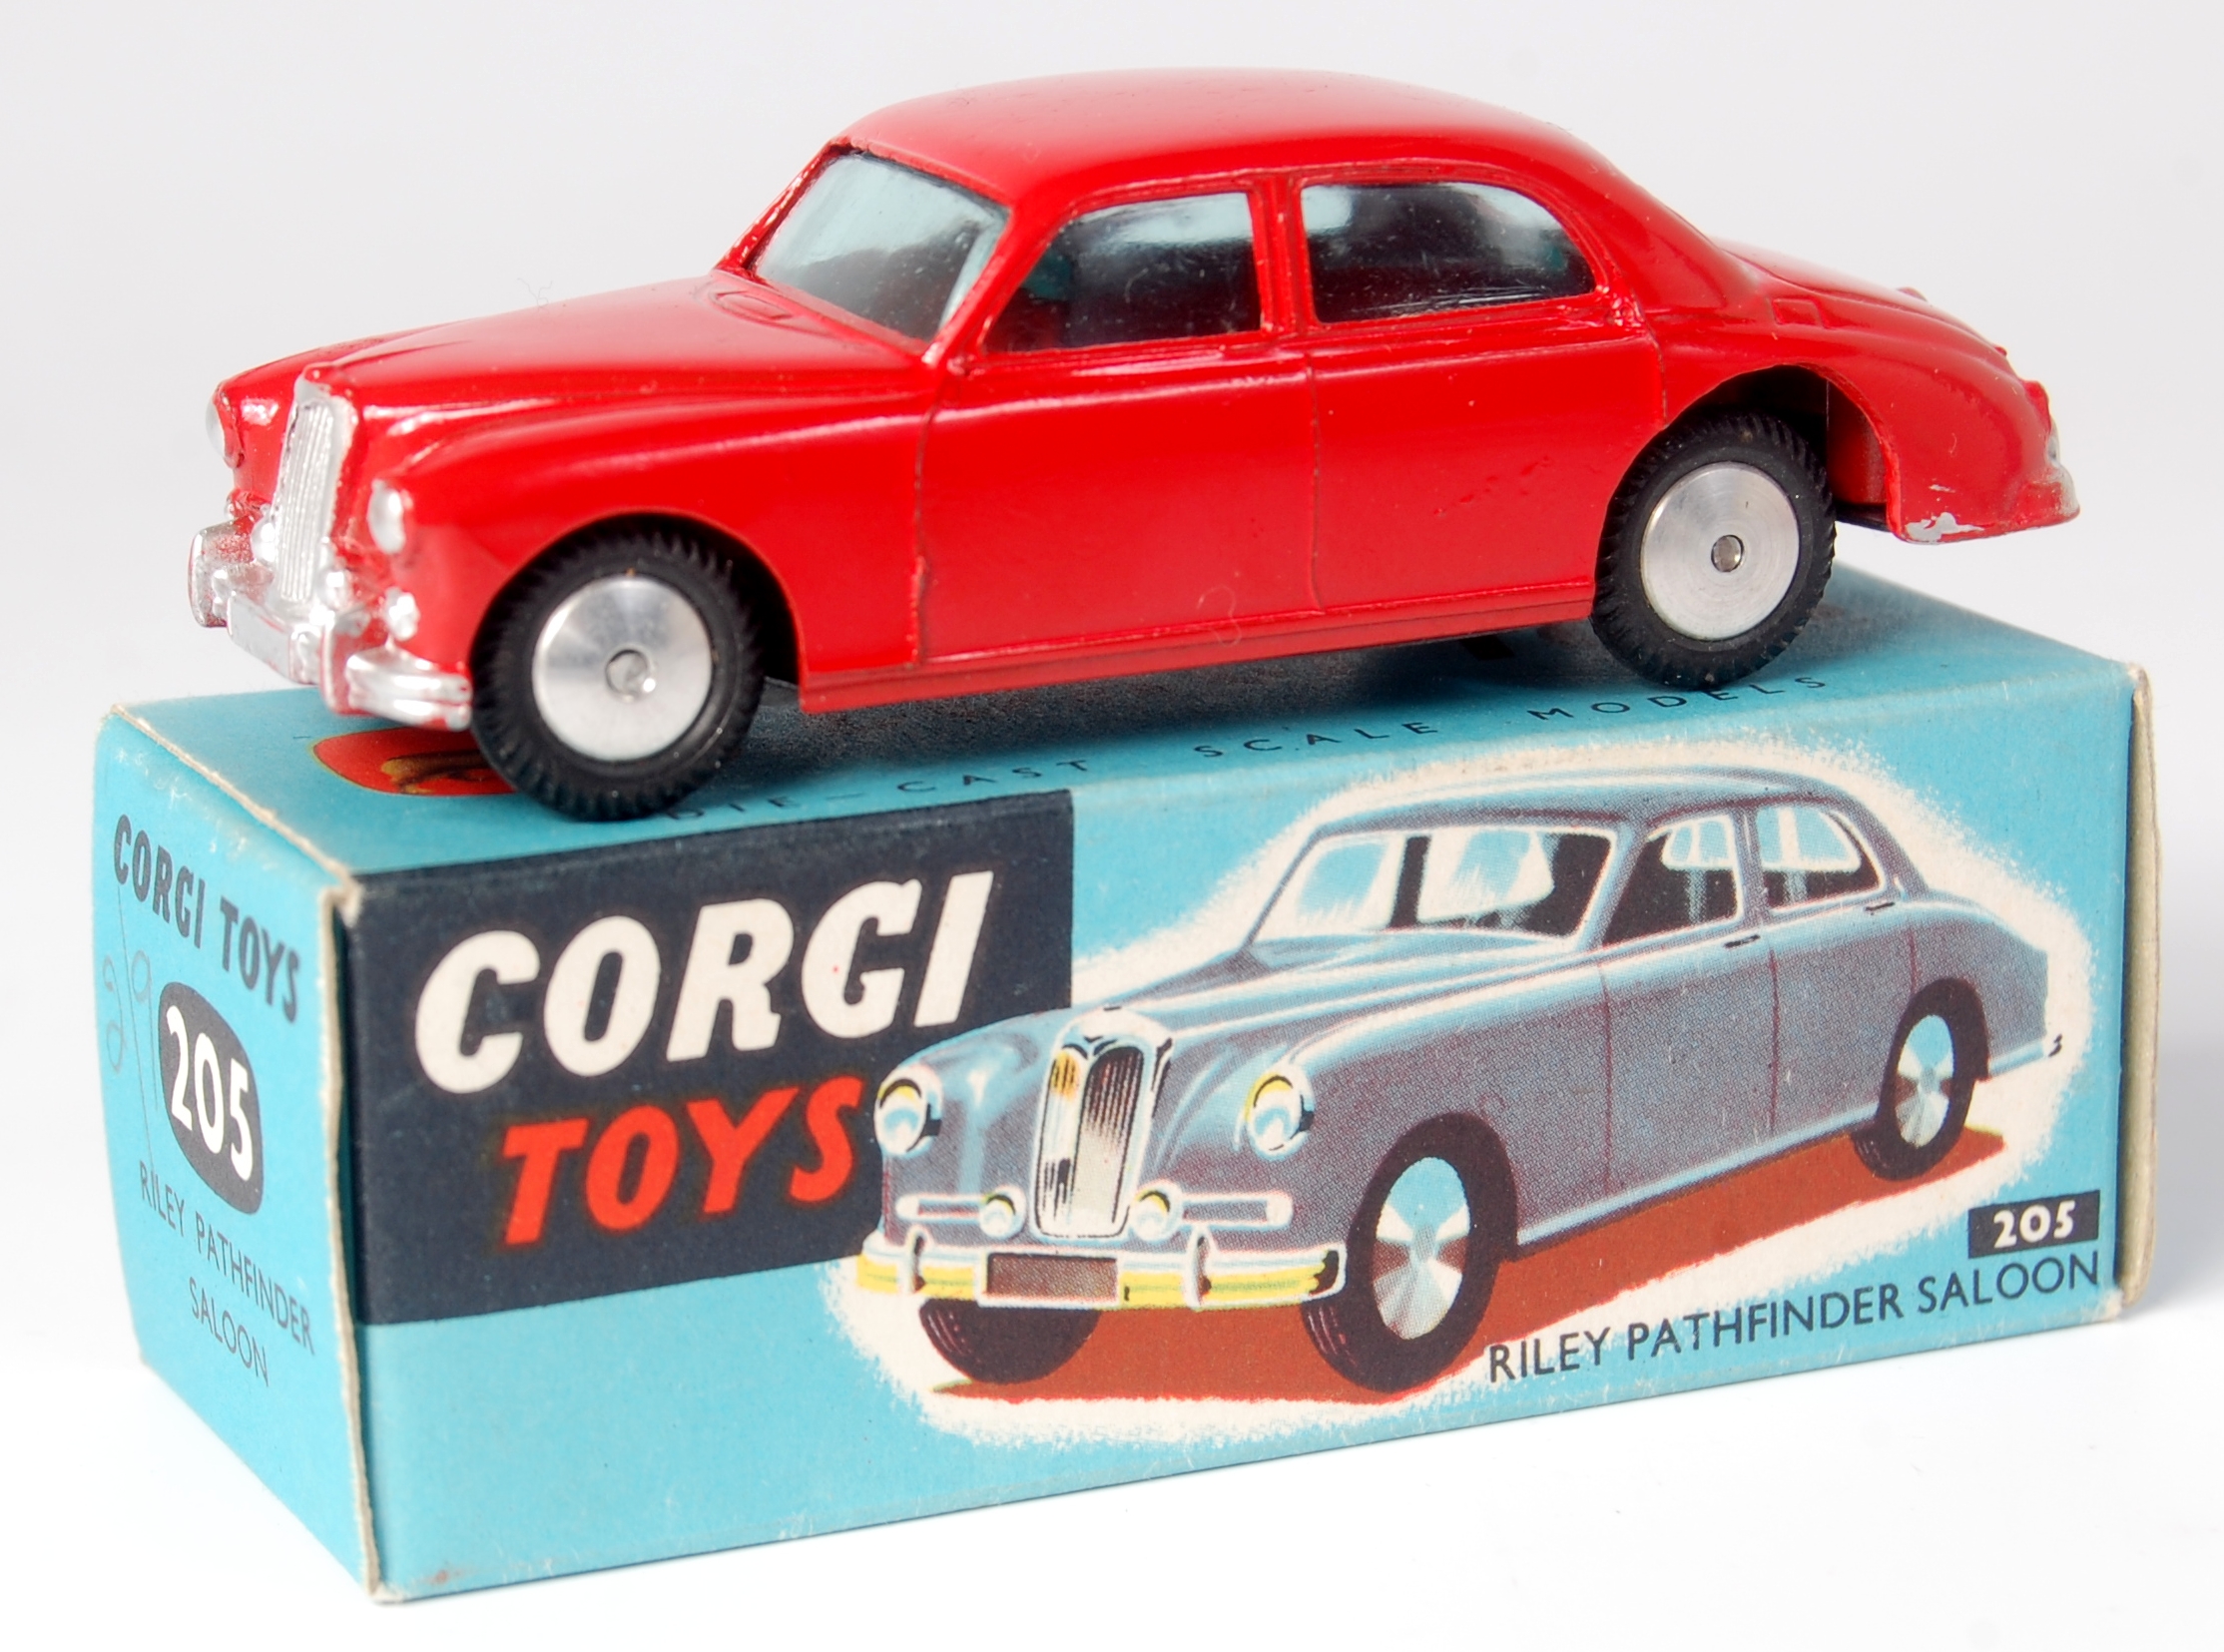 Corgi Toys, 205 Riley Pathfinder Saloon, red body with silver detailing and flat spun hubs, in the